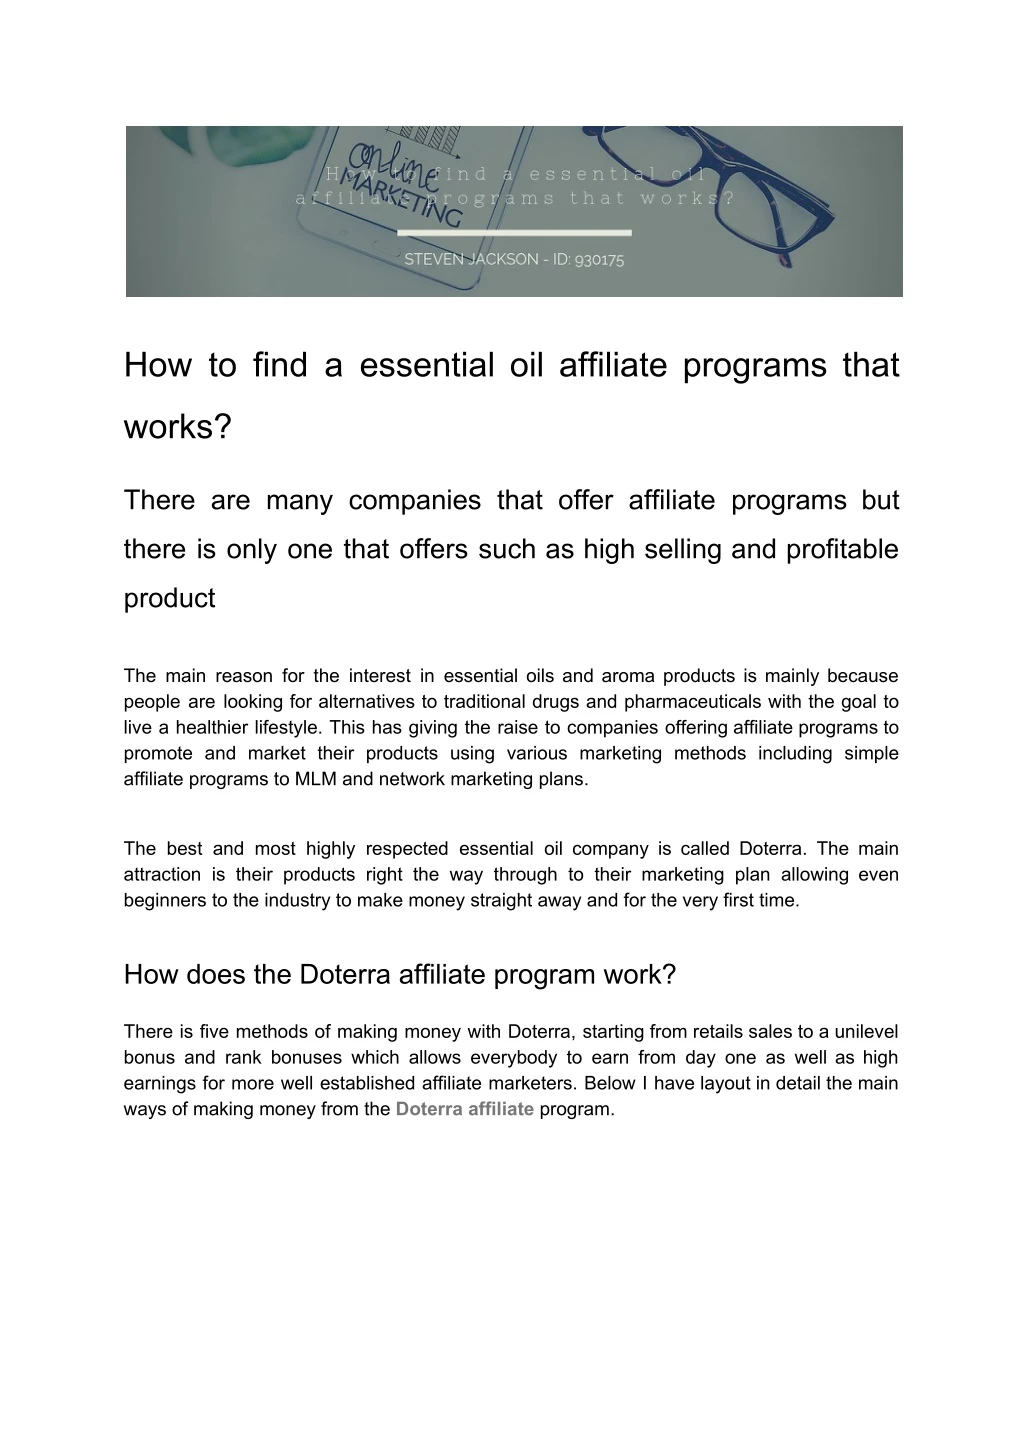 how to find a essential oil affiliate programs